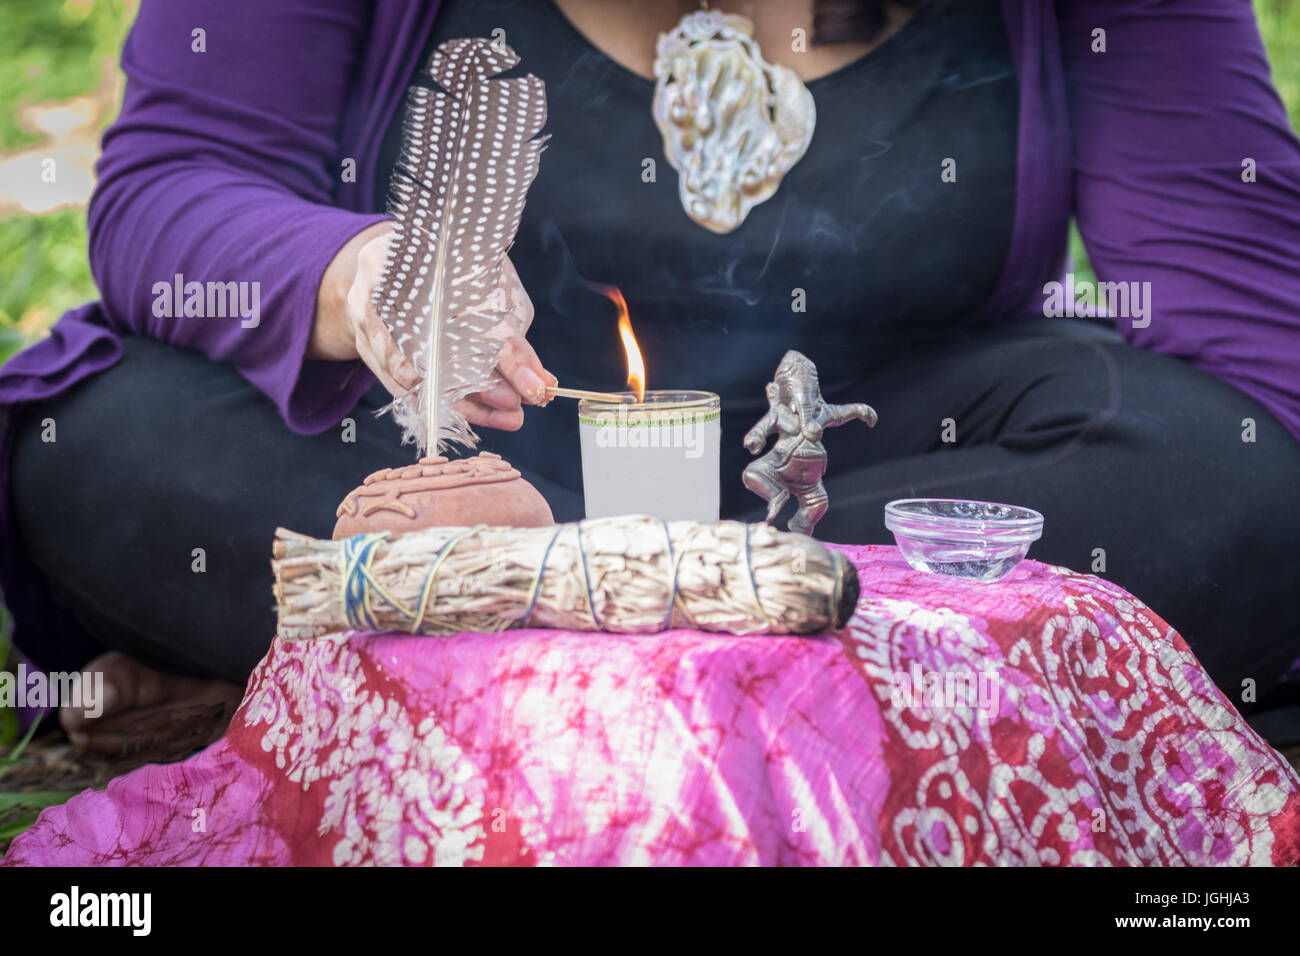 Female shaman lighting candle at altar seated on the ground. You can see the flame the represents fire, along with water, ganesha and other symbols. Stock Photo